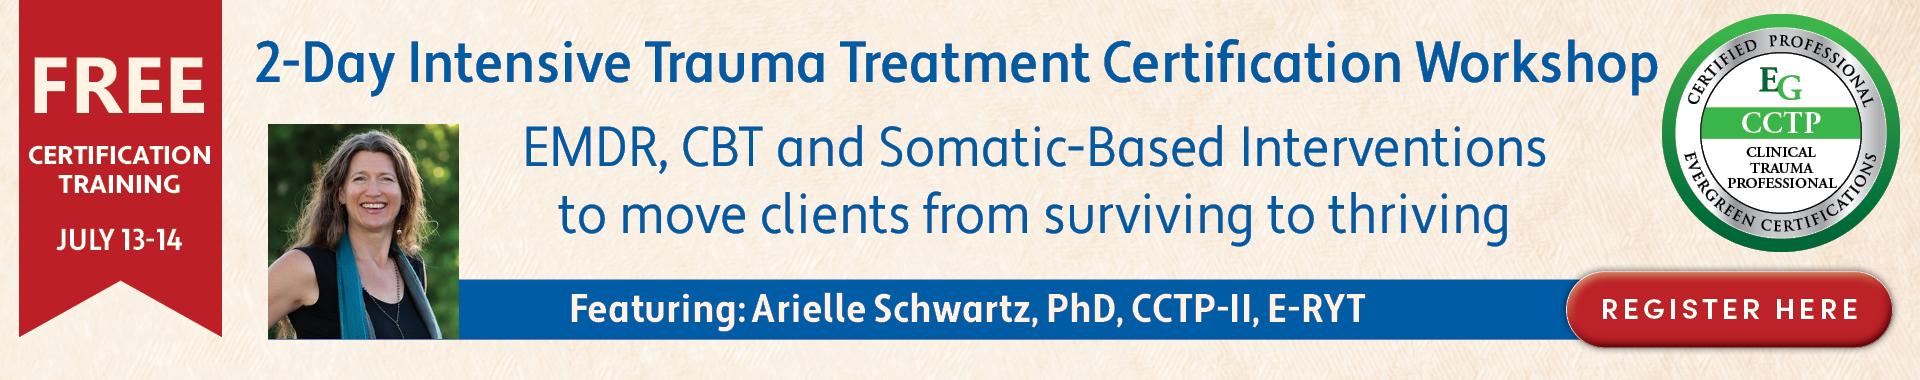 FREE 2-Day Intensive Trauma Treatment Certification Workshop: EMDR, CBT and Somatic-Based Interventions to Move Clients from Surviving to Thriving